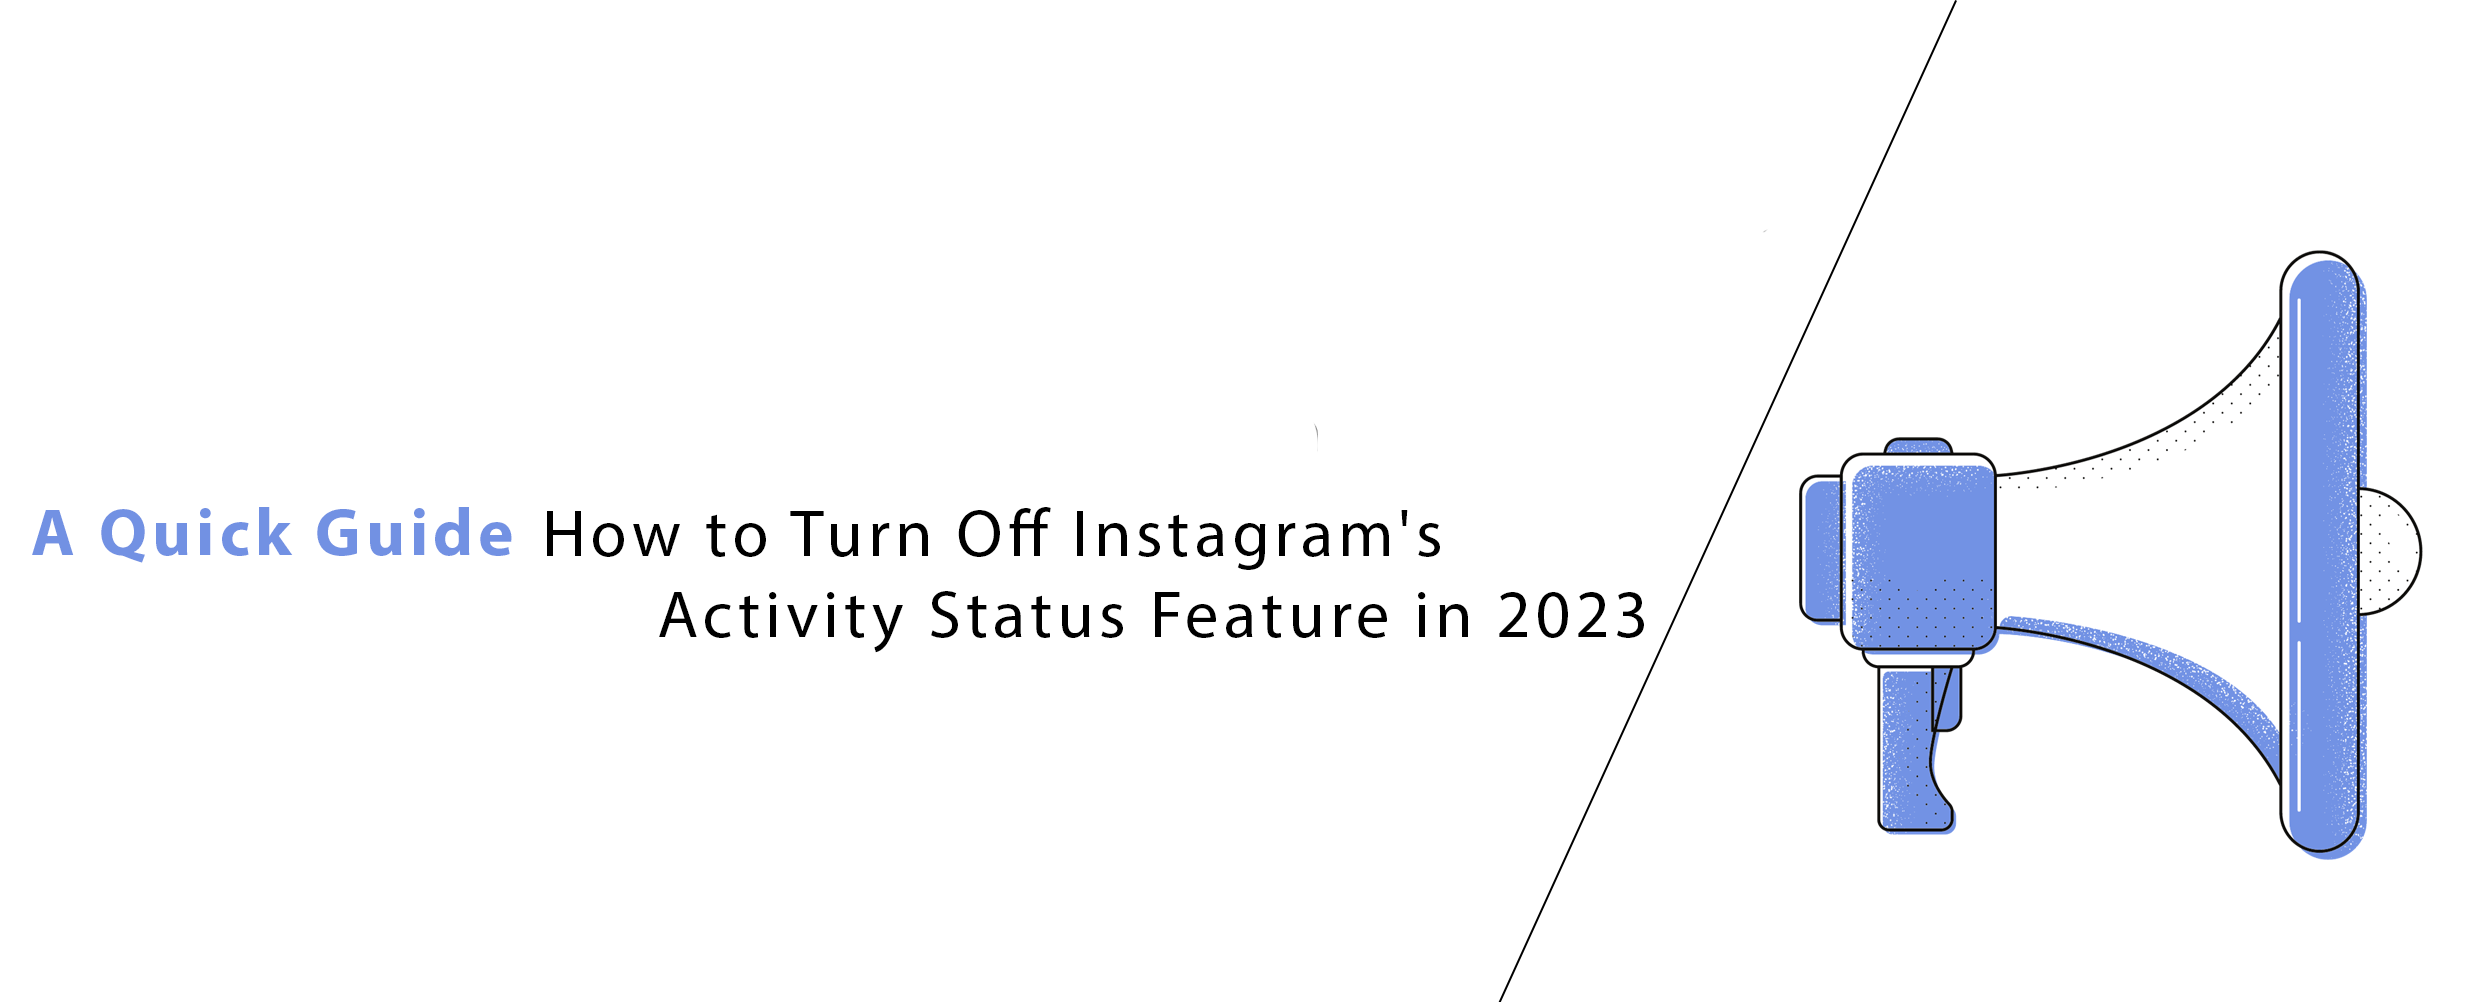 How to Turn Off Instagram's Activity Status Feature in 2023